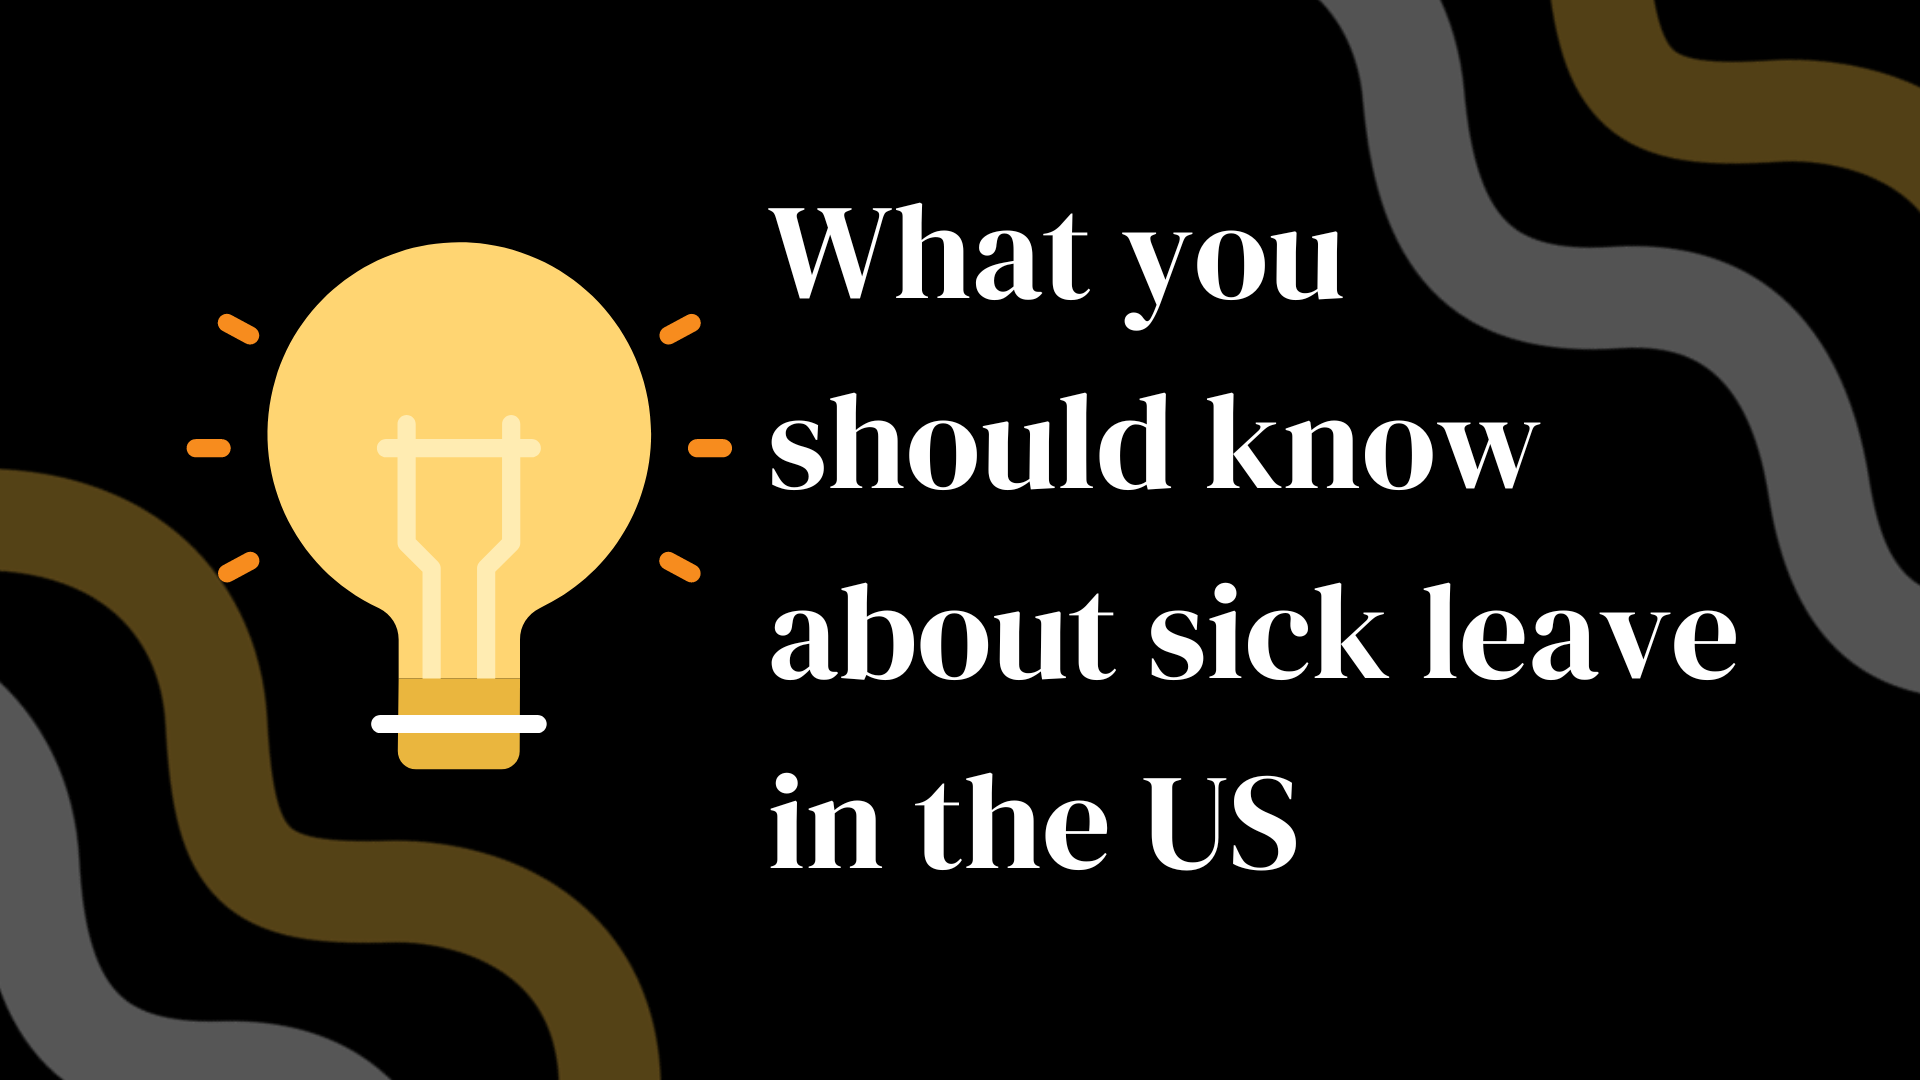 What you should know about sick leave in the US